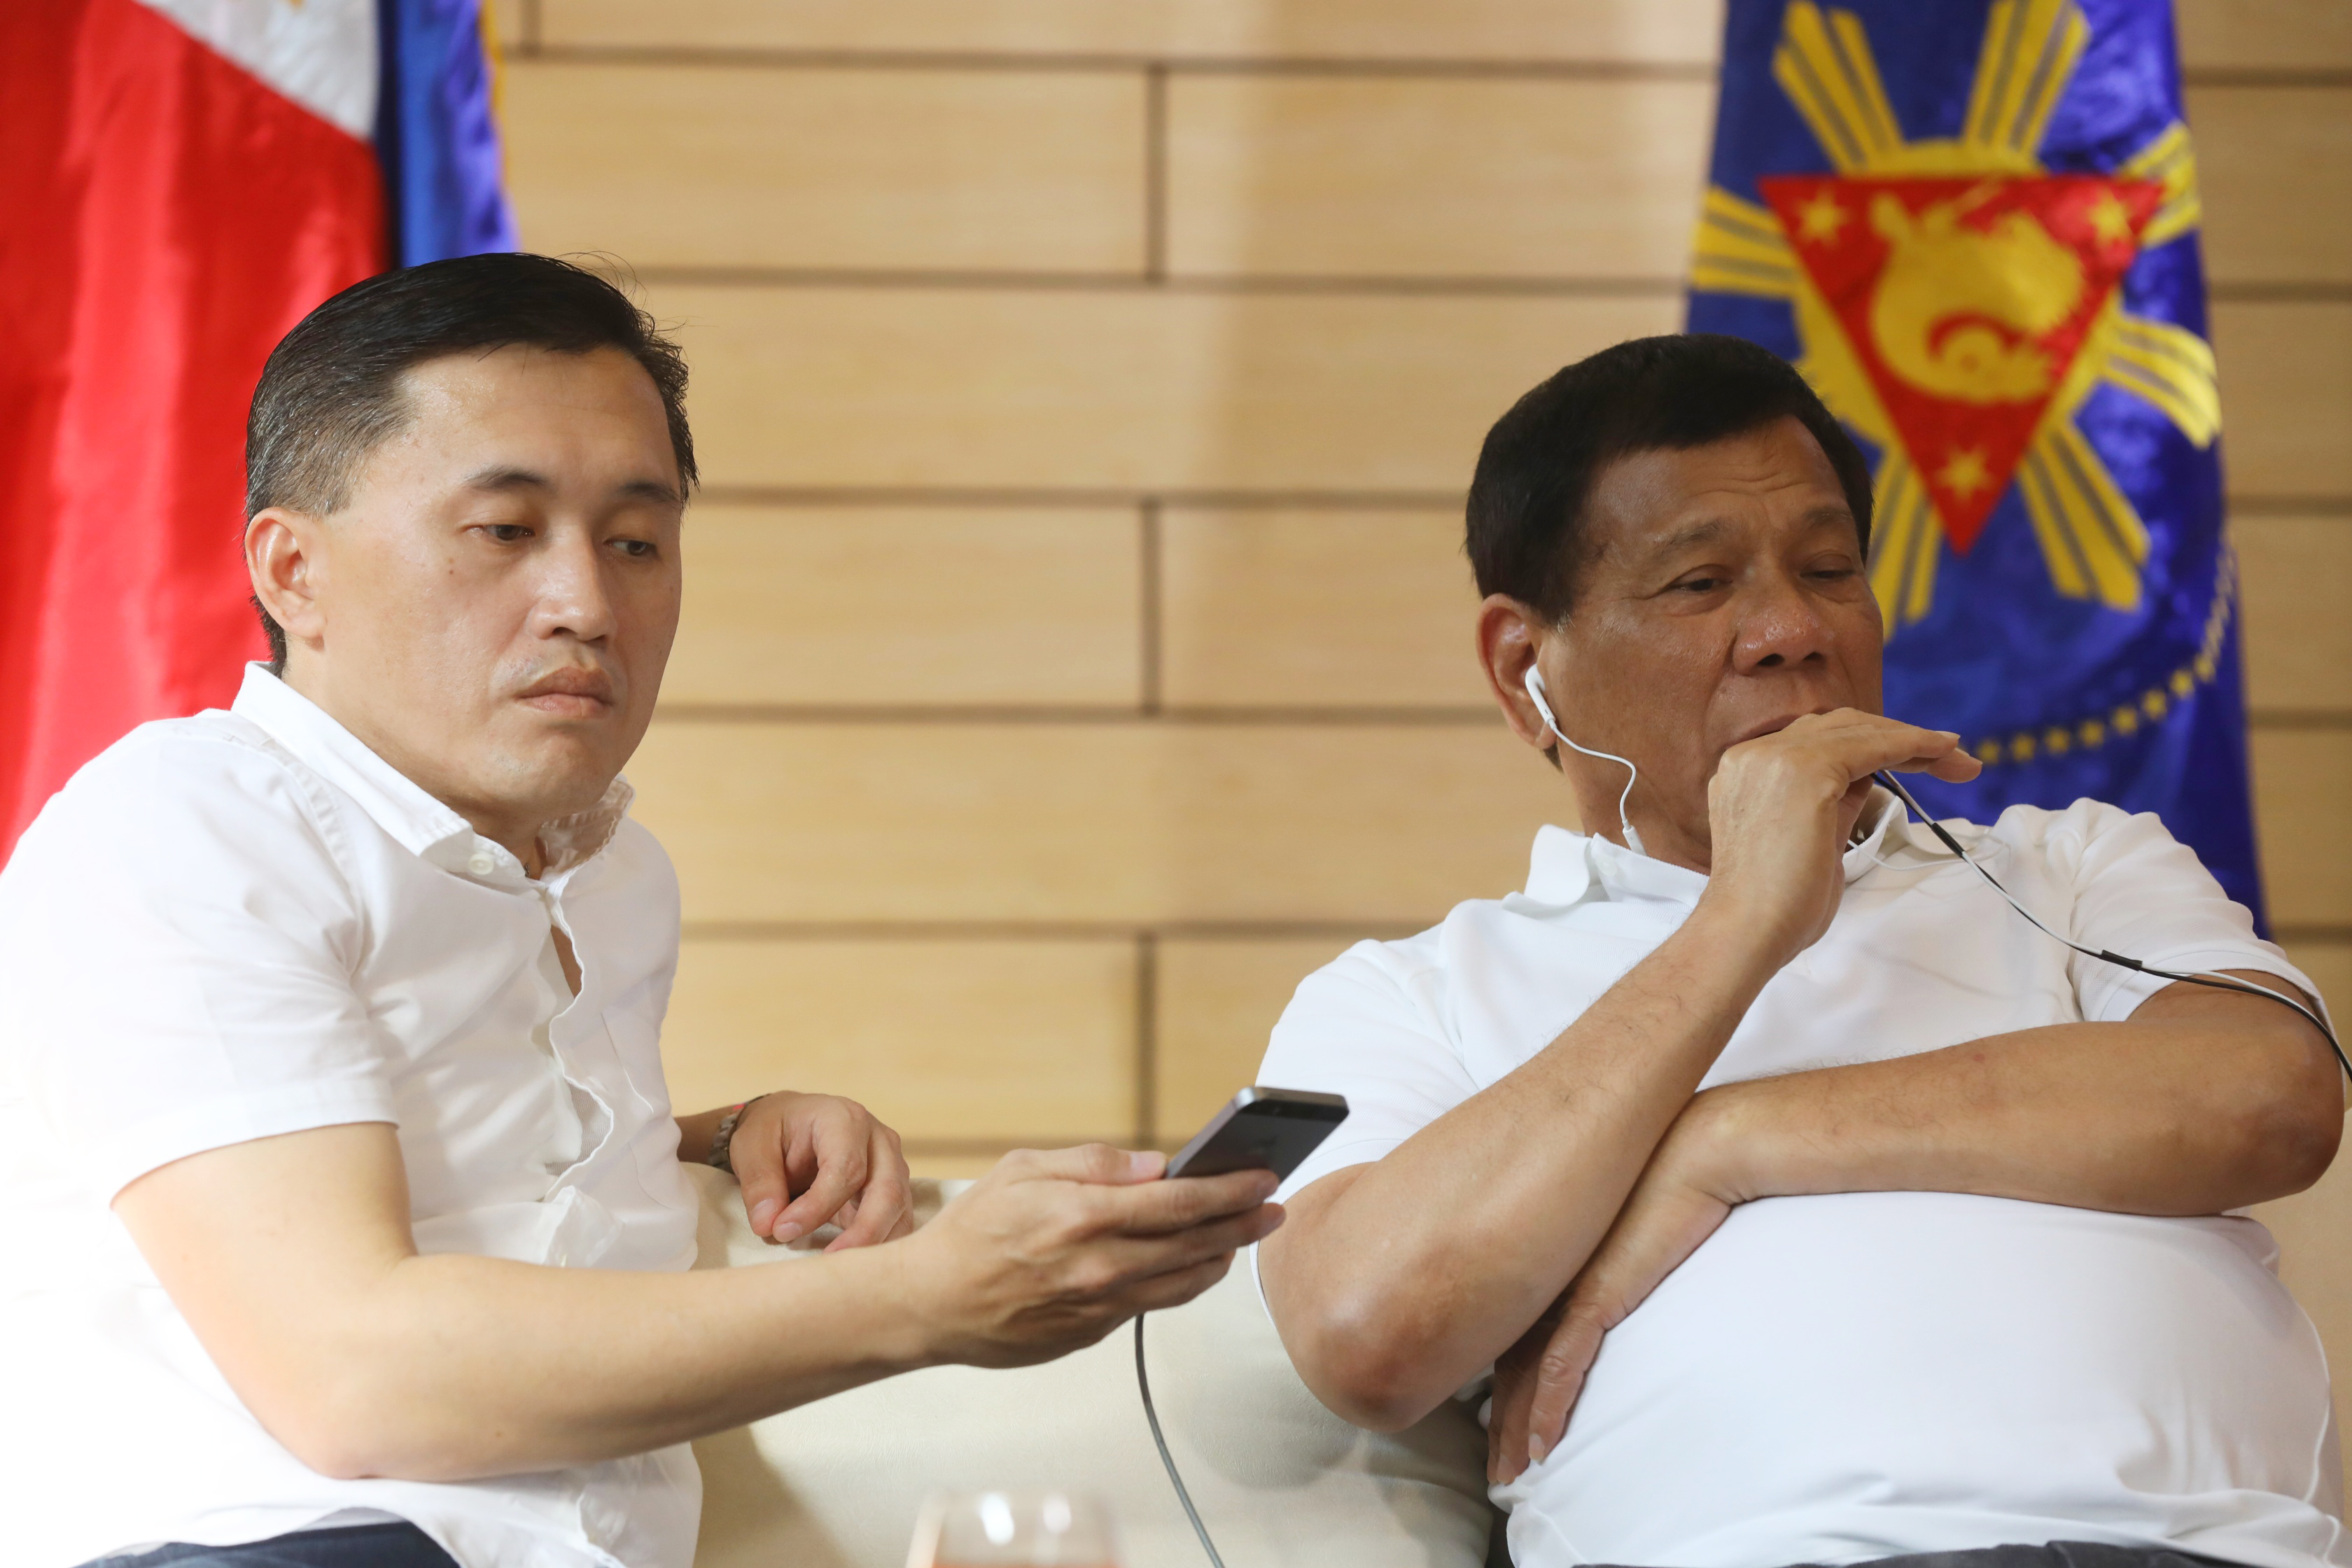 PHONE CALL. Philippine President Rodrigo Duterte speaks to Chinese President Xi Jinping on the phone with the help of Special Assistant to the President Bong Go. Malacañang photo 